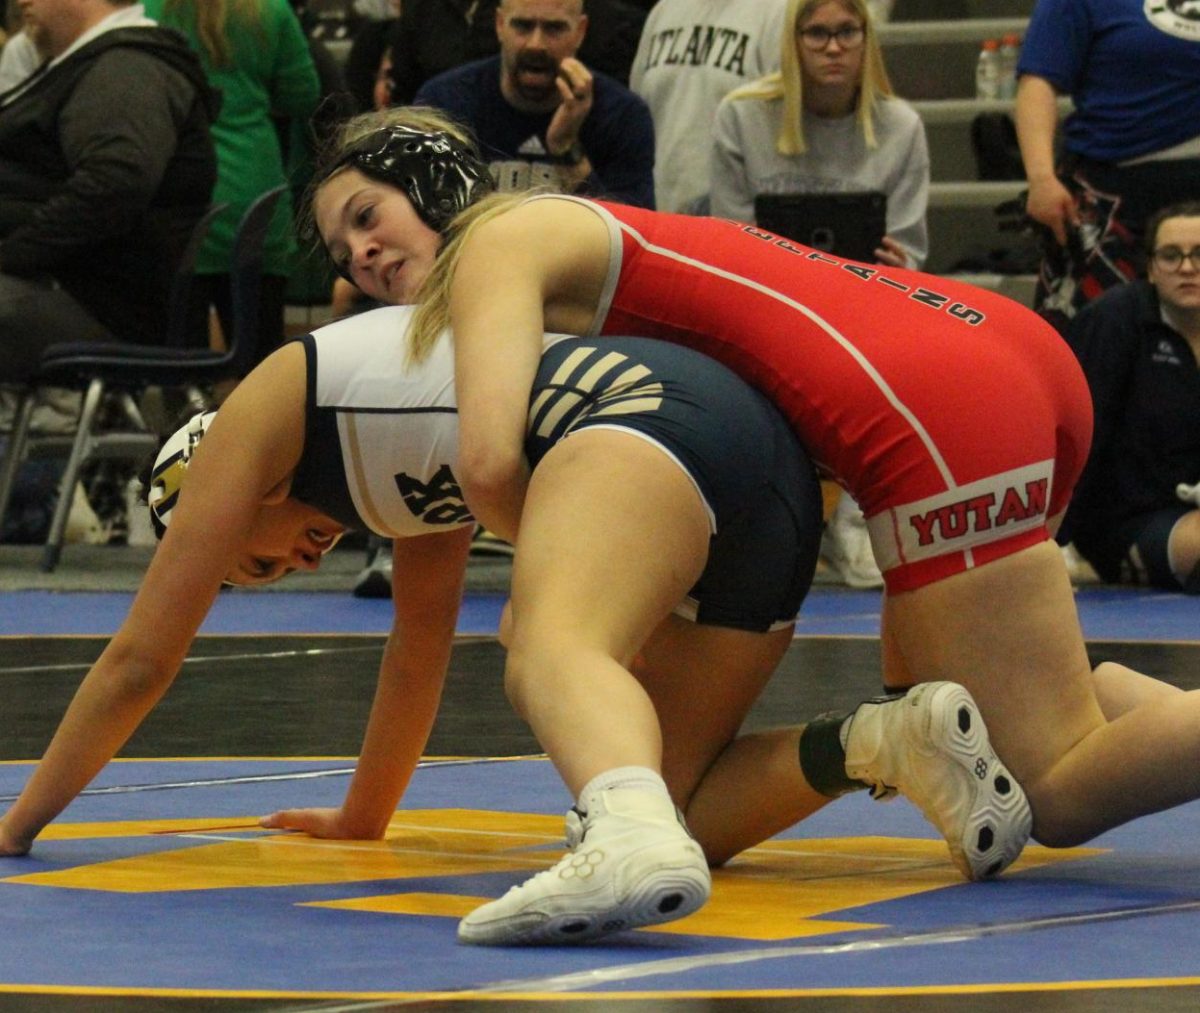 Nicole wrestles with an opponent during a match. Wacker is currently in her second year of wrestling.